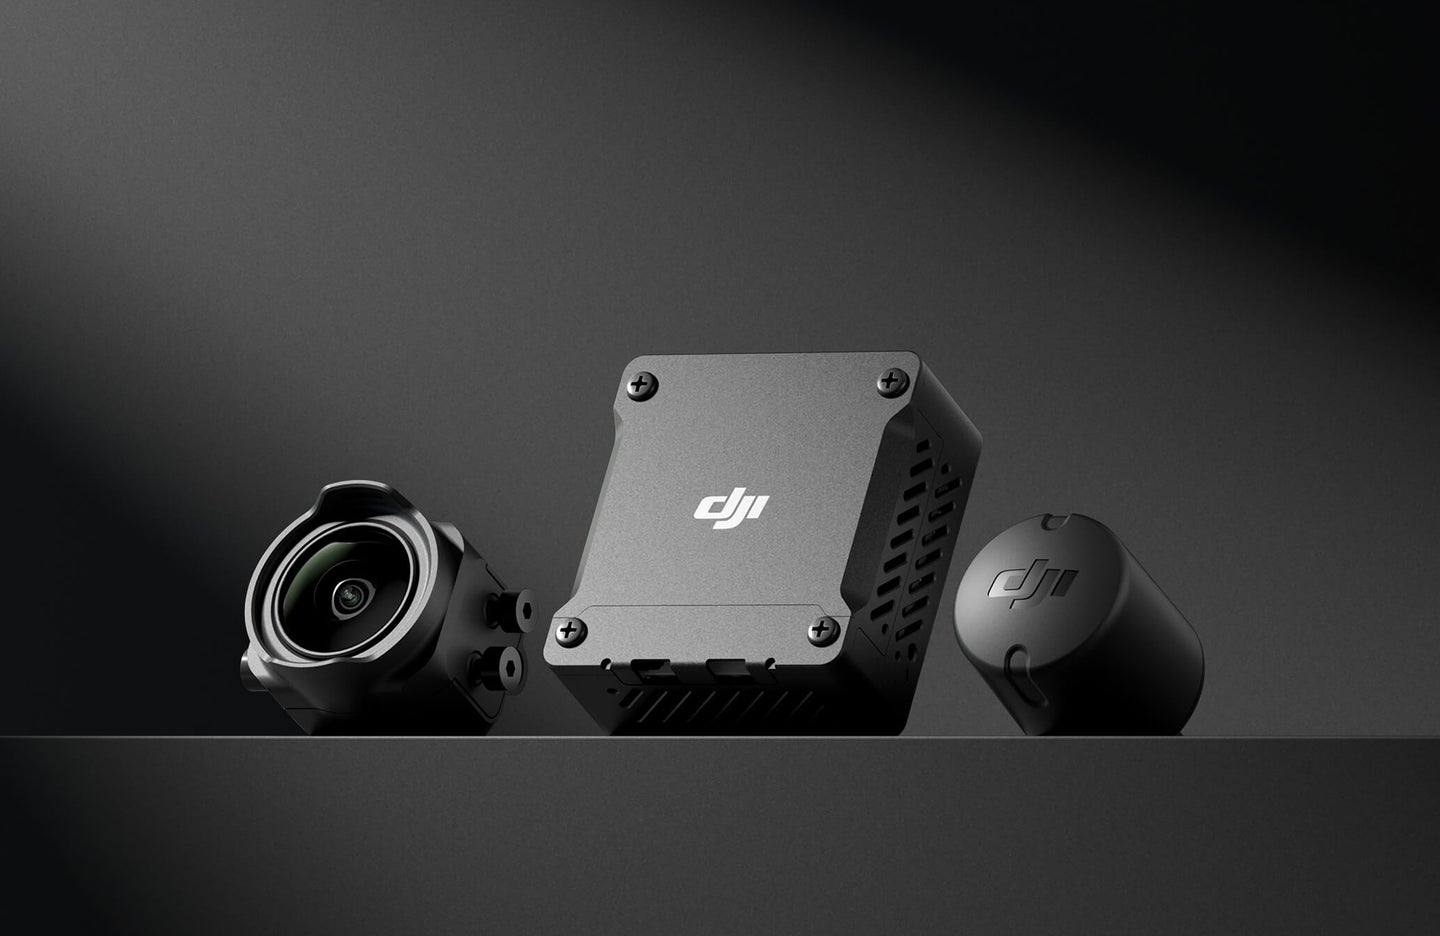 The new DJI O3 Air Unit for FPV flying